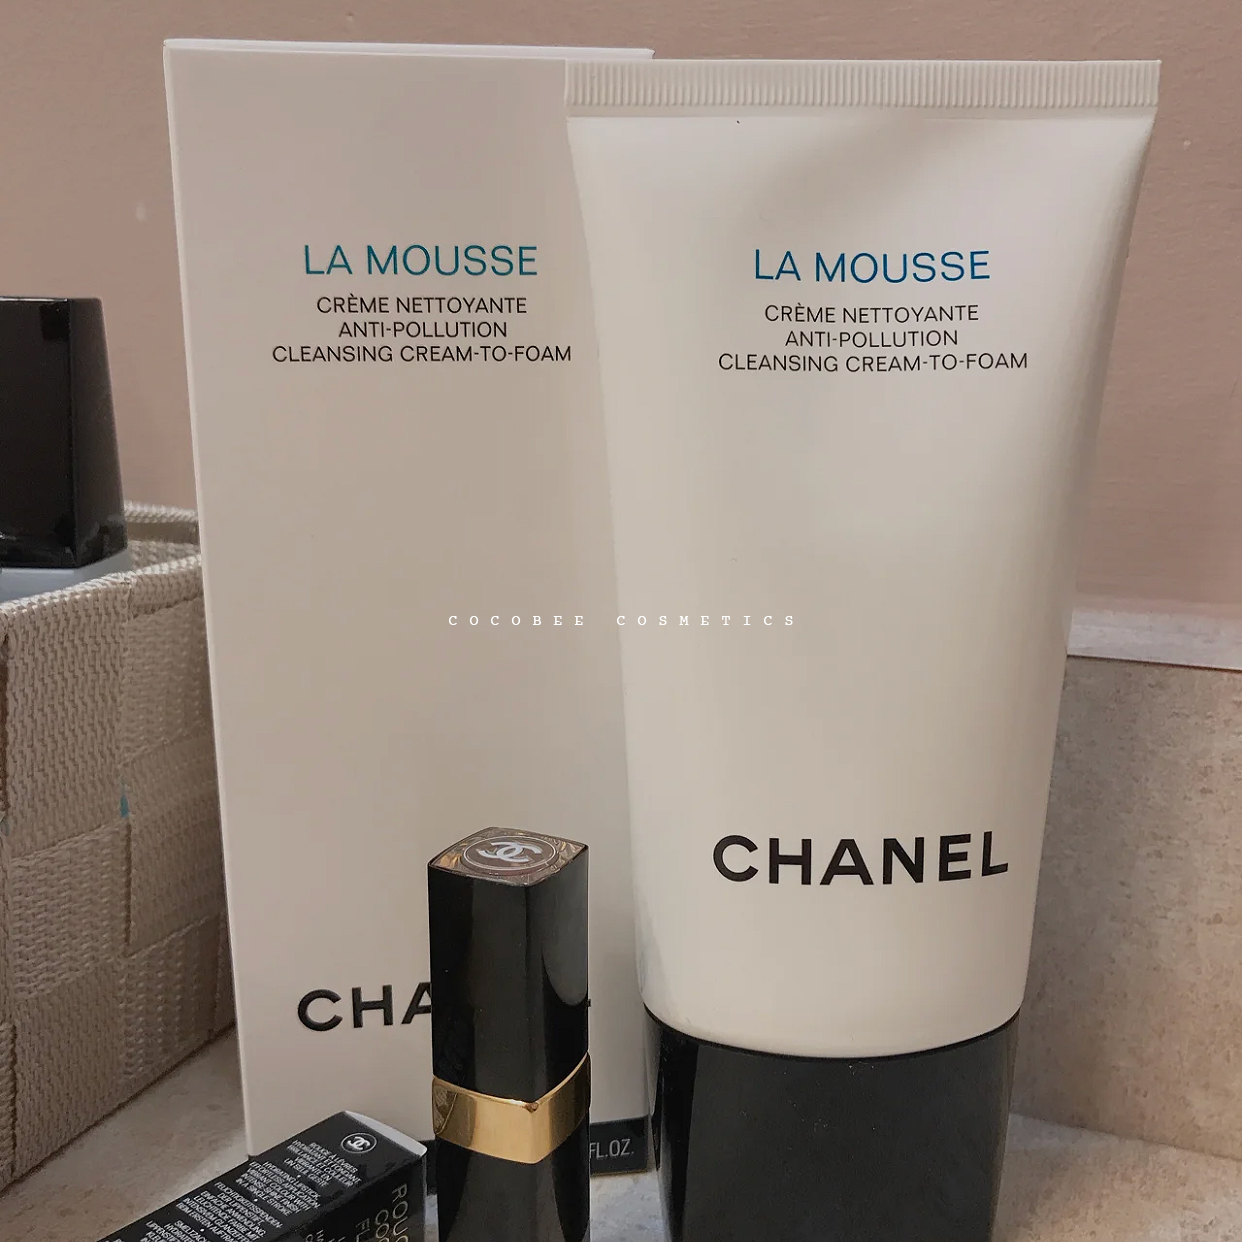 CHANEL La Mousse Cleanser Review  CRISTINA MADARA  YouTube